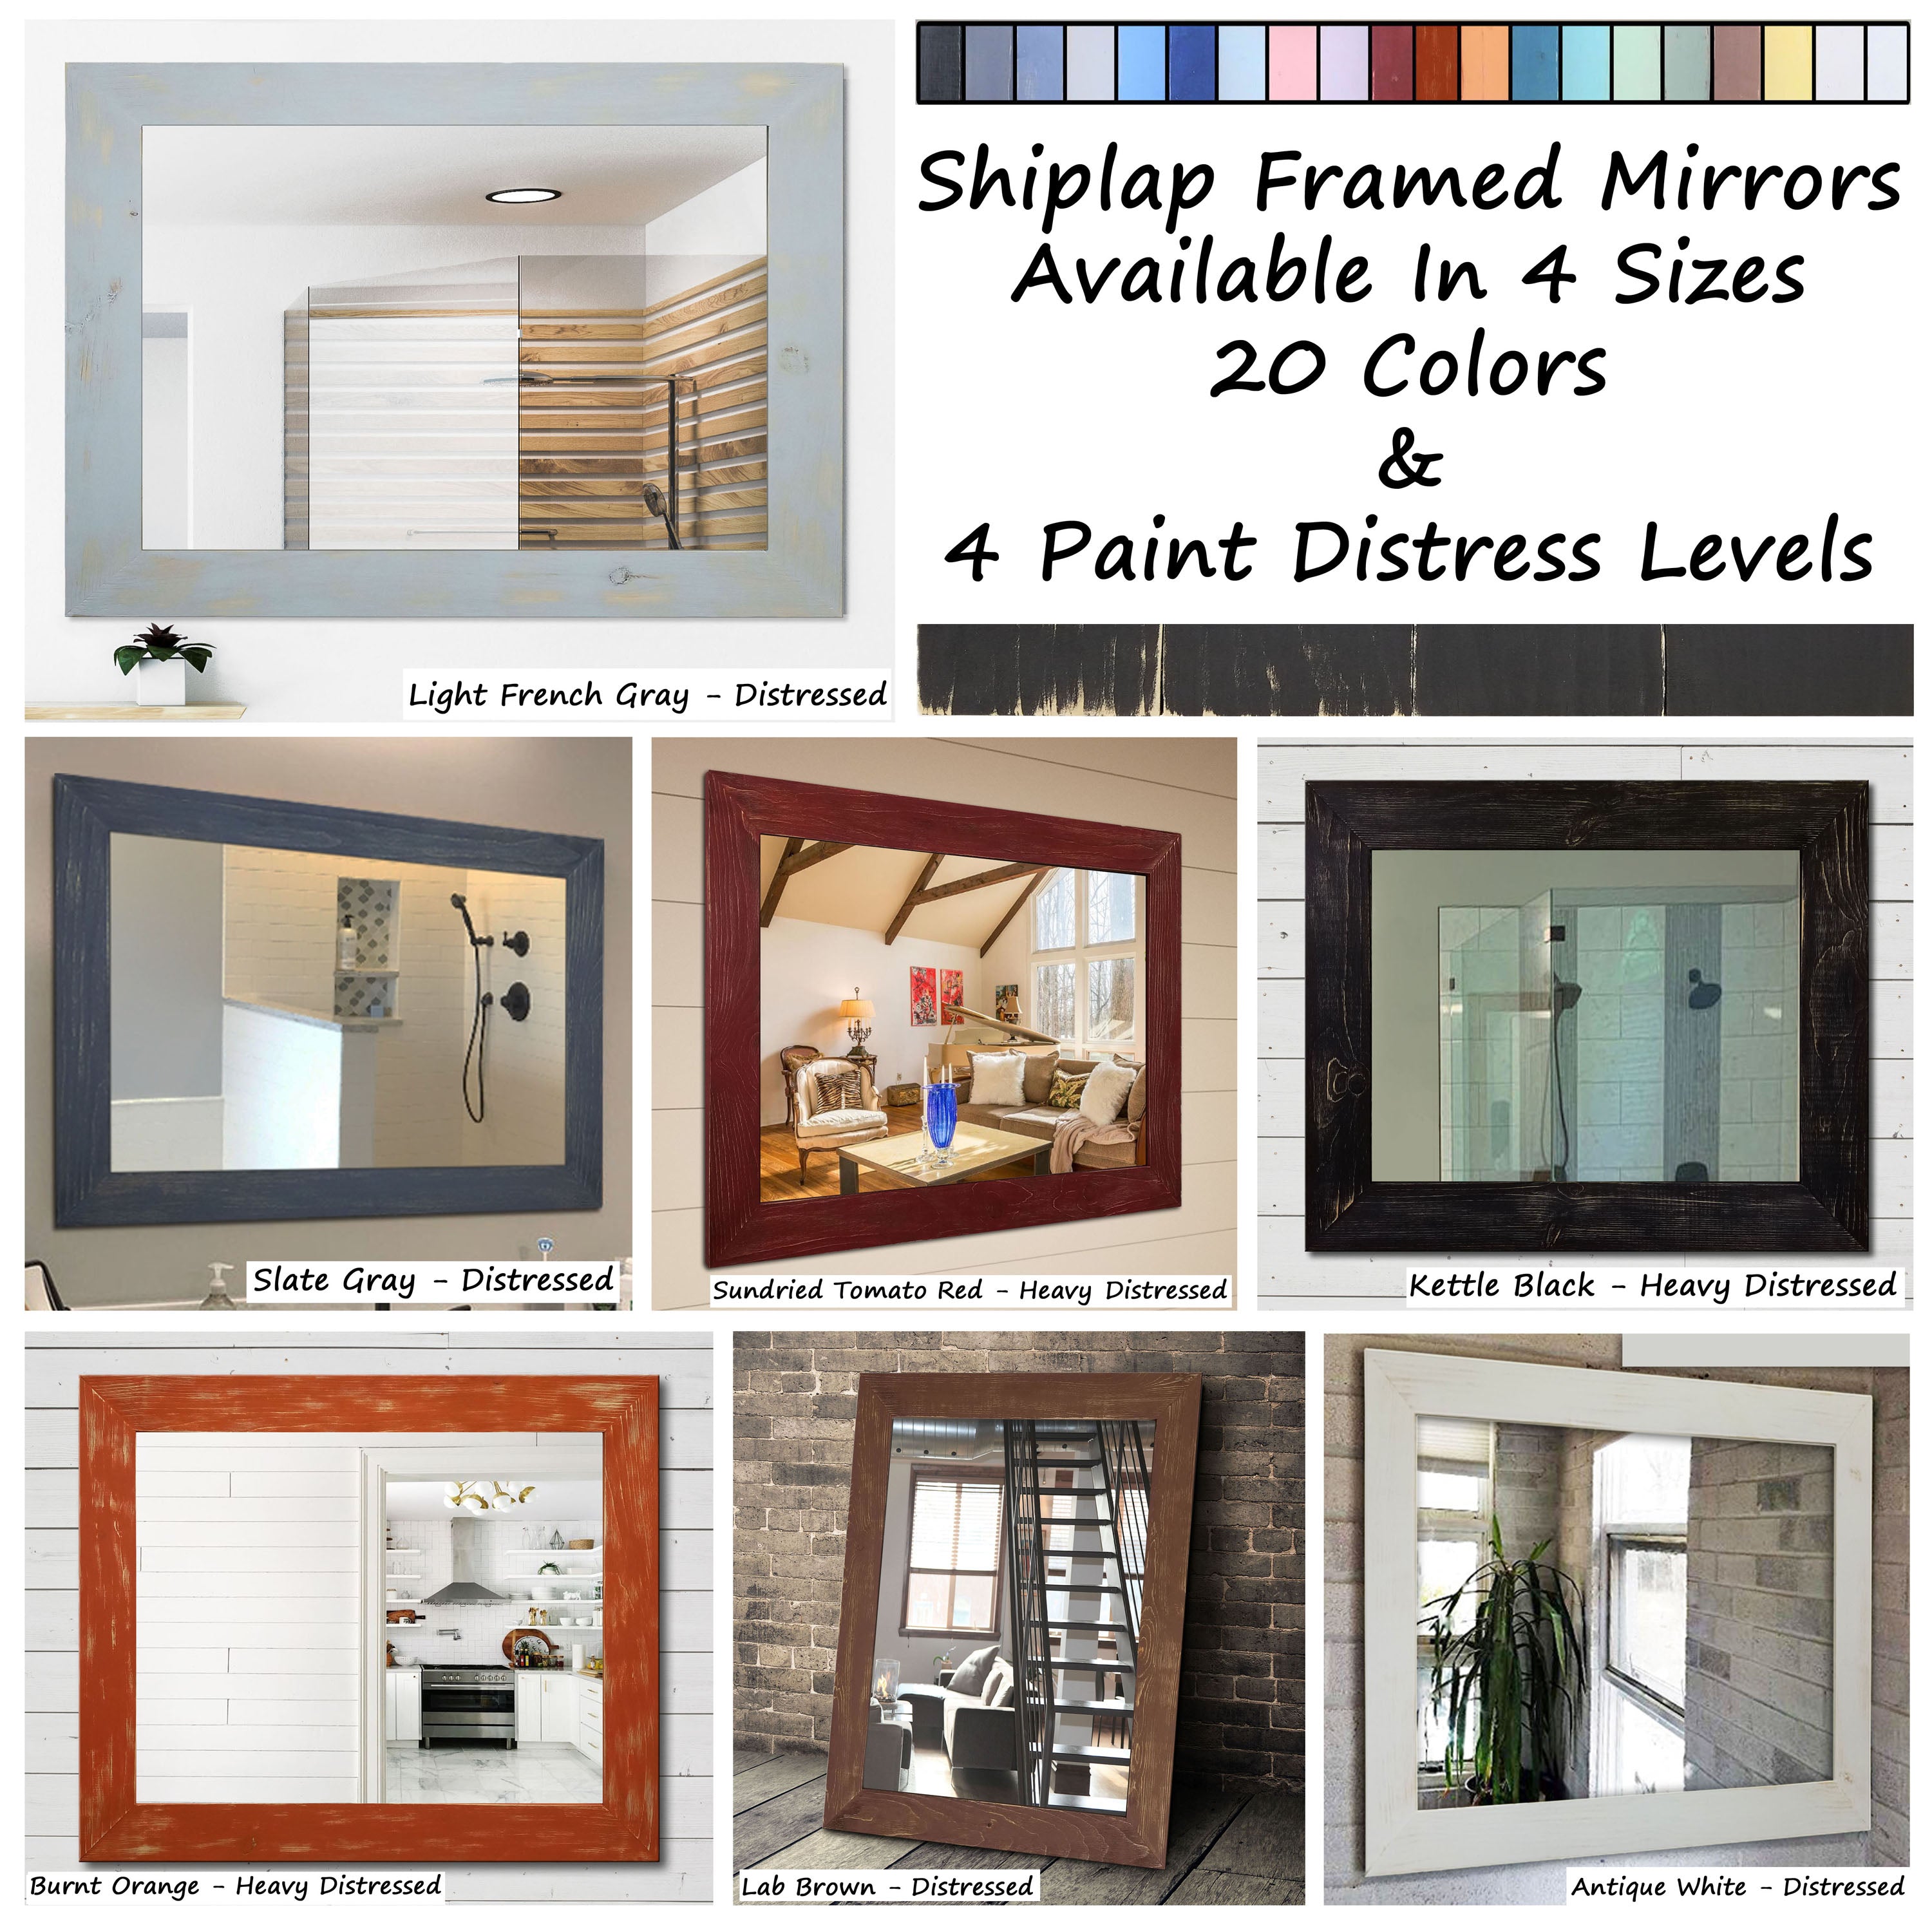 Shiplap Rustic Wood Framed Mirror, 20 Paint Colors - Shown In Slate Gray